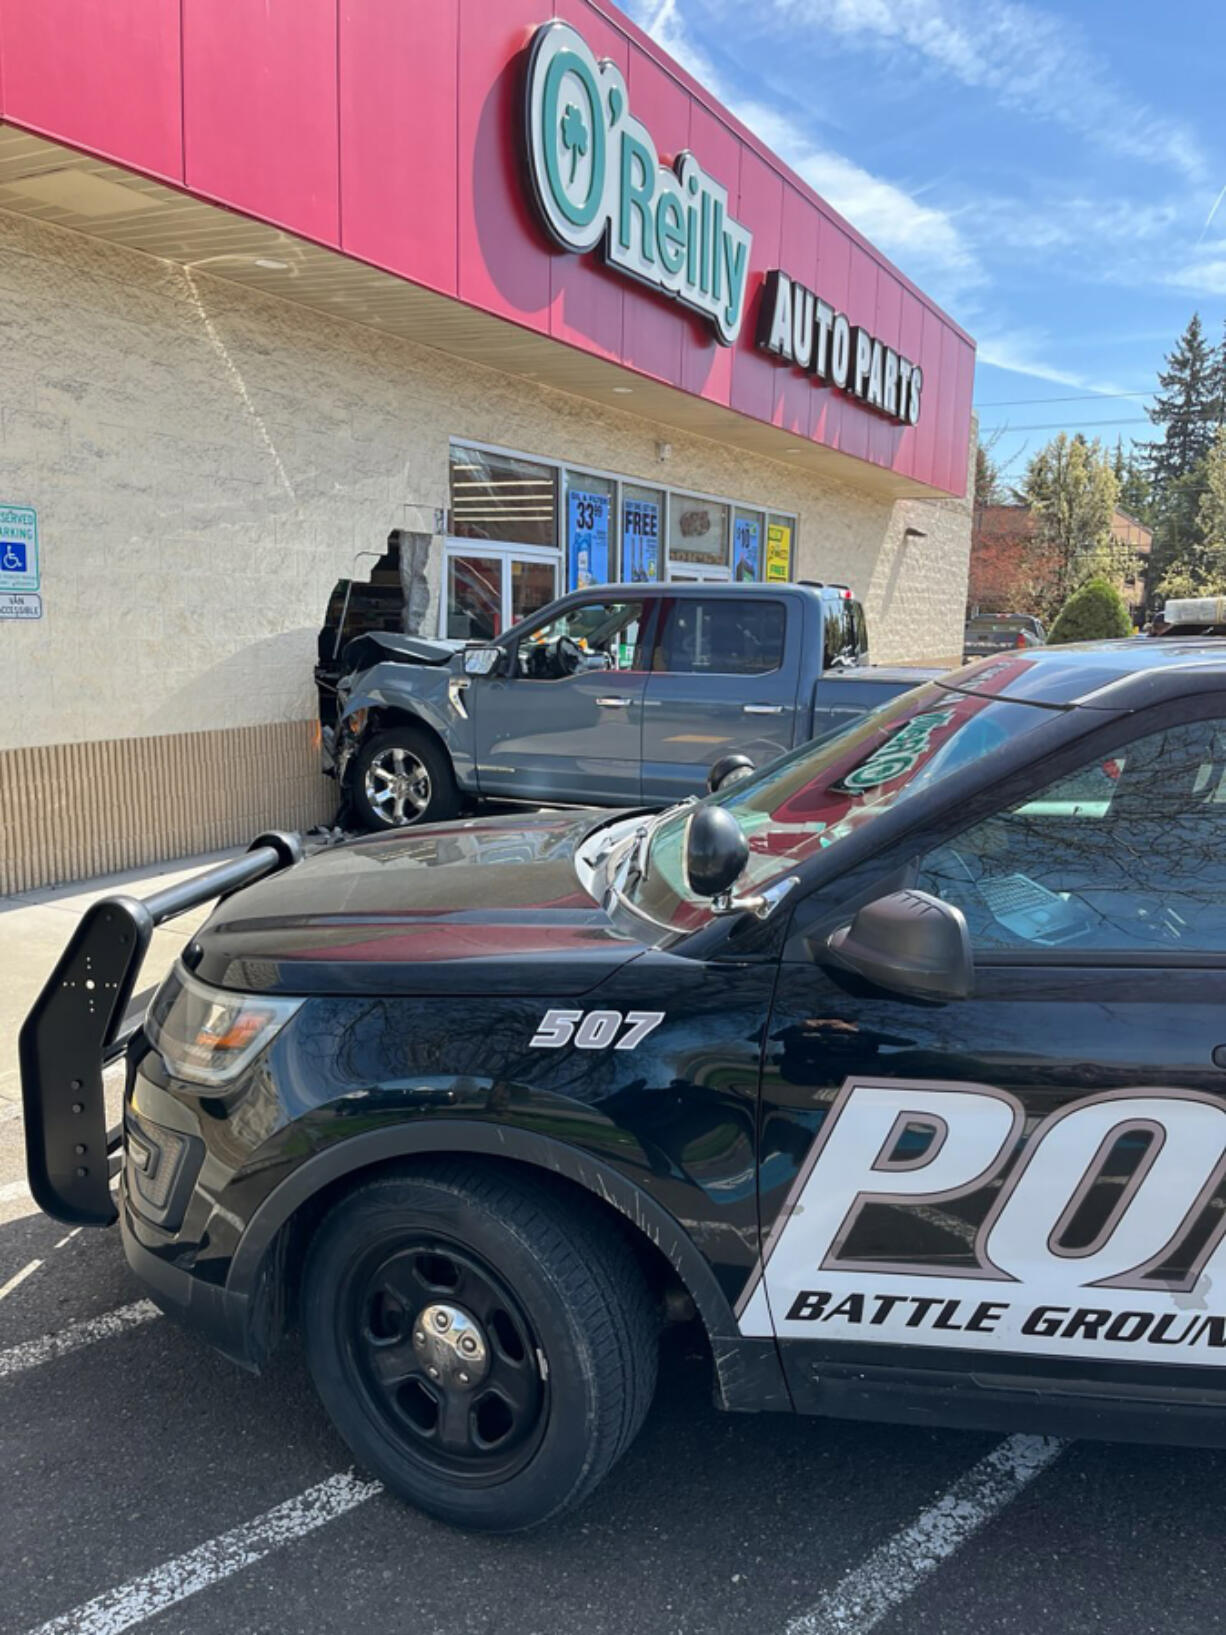 A pickup that crashed into O&rsquo;Reilly Auto Parts on Monday afternoon in Battle Ground. Police said the driver suffered minor injuries, and city officials closed the business until the building&rsquo;s structure can be fully evaluated.